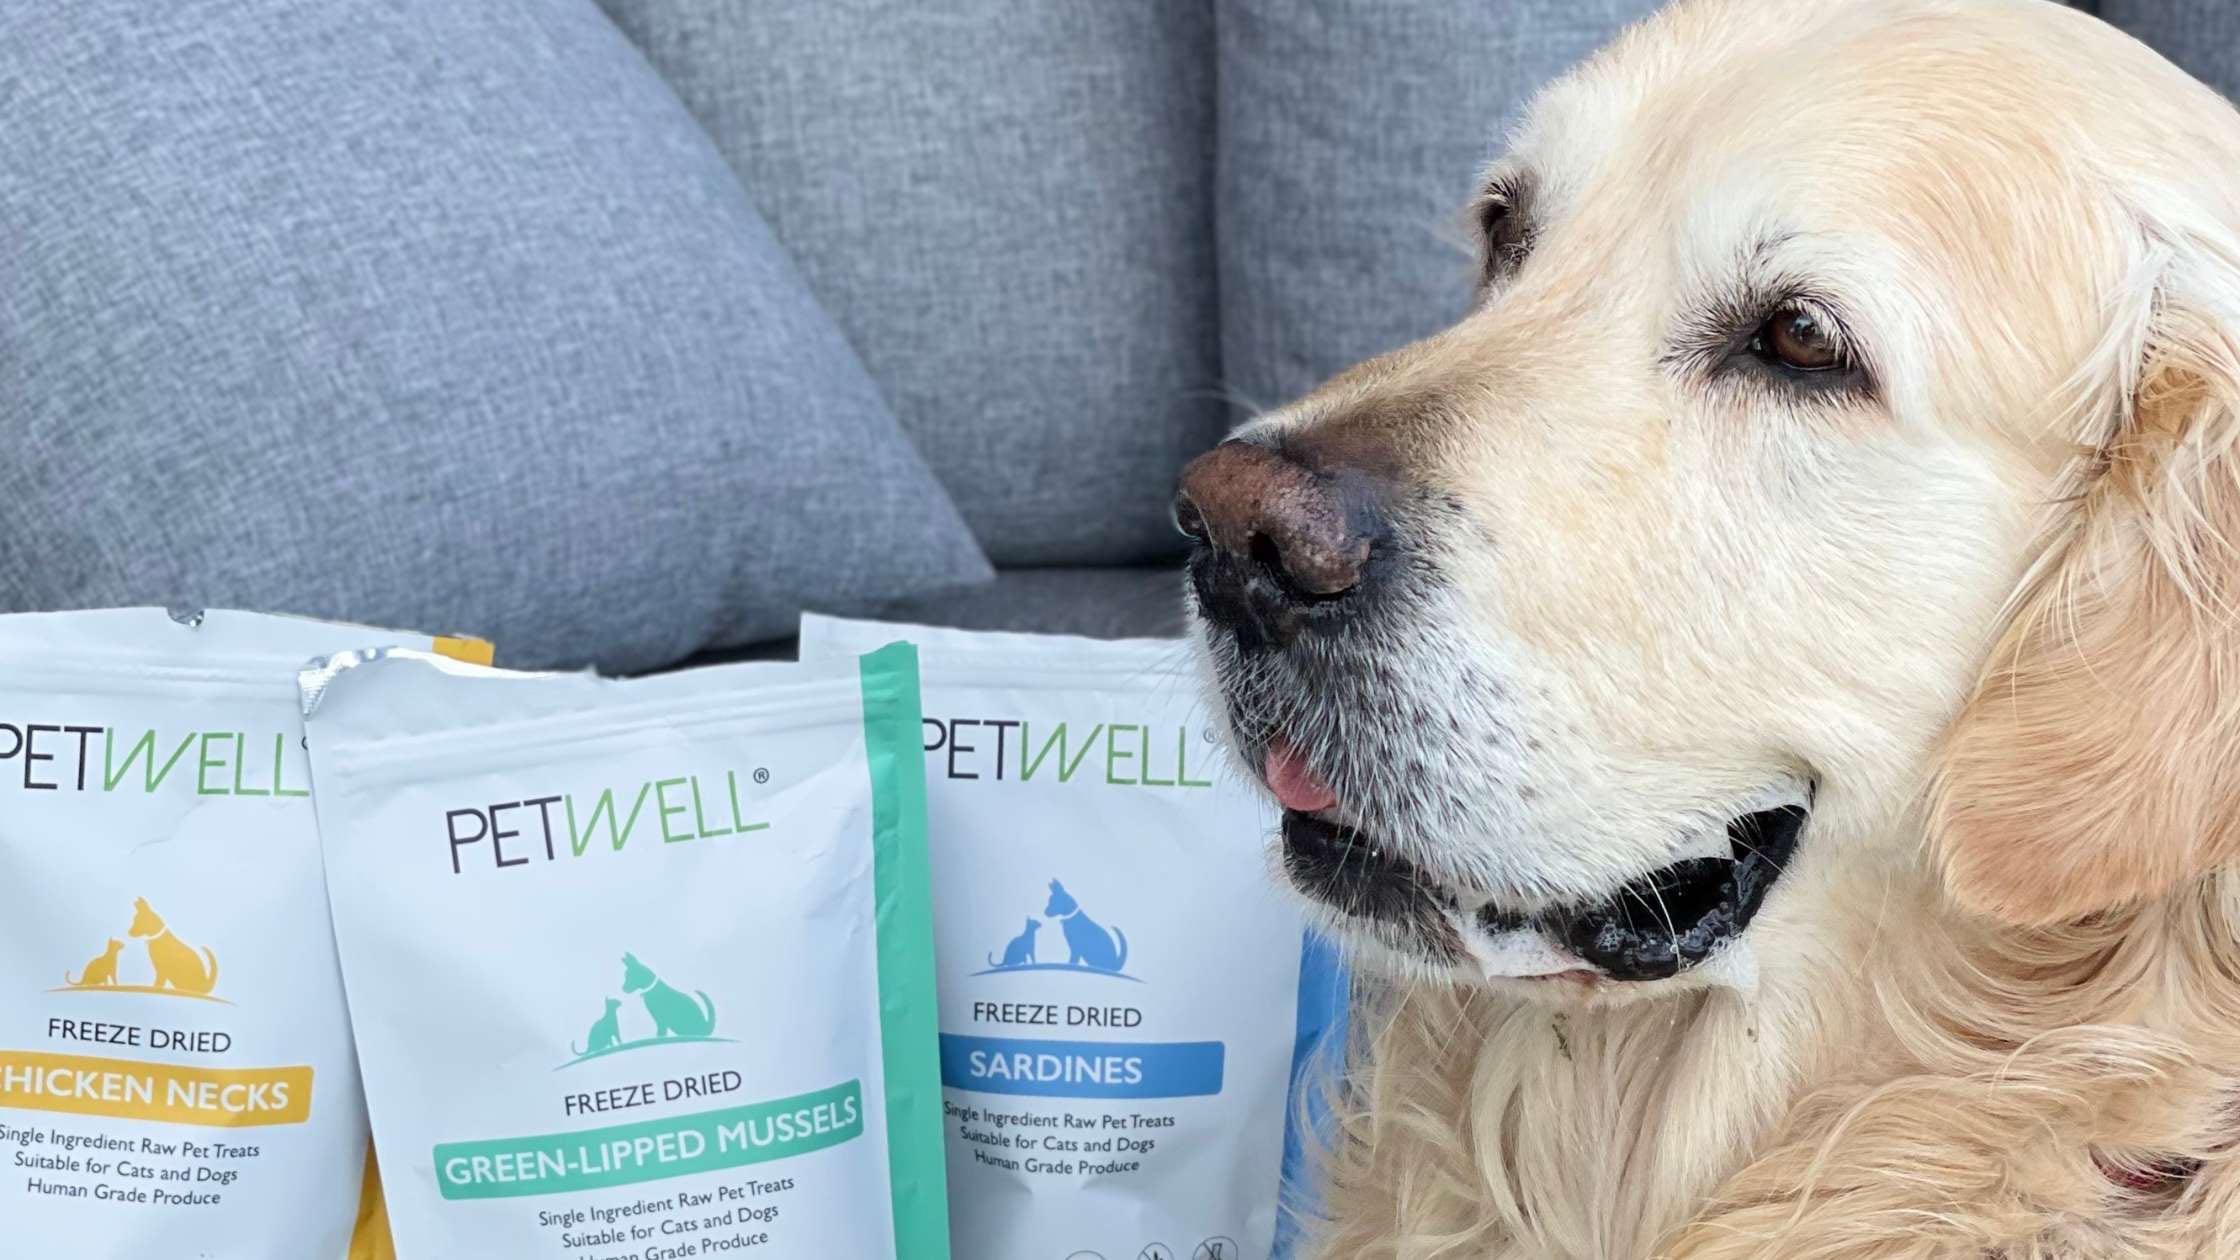 Best Dog Treats for Training by PetWell